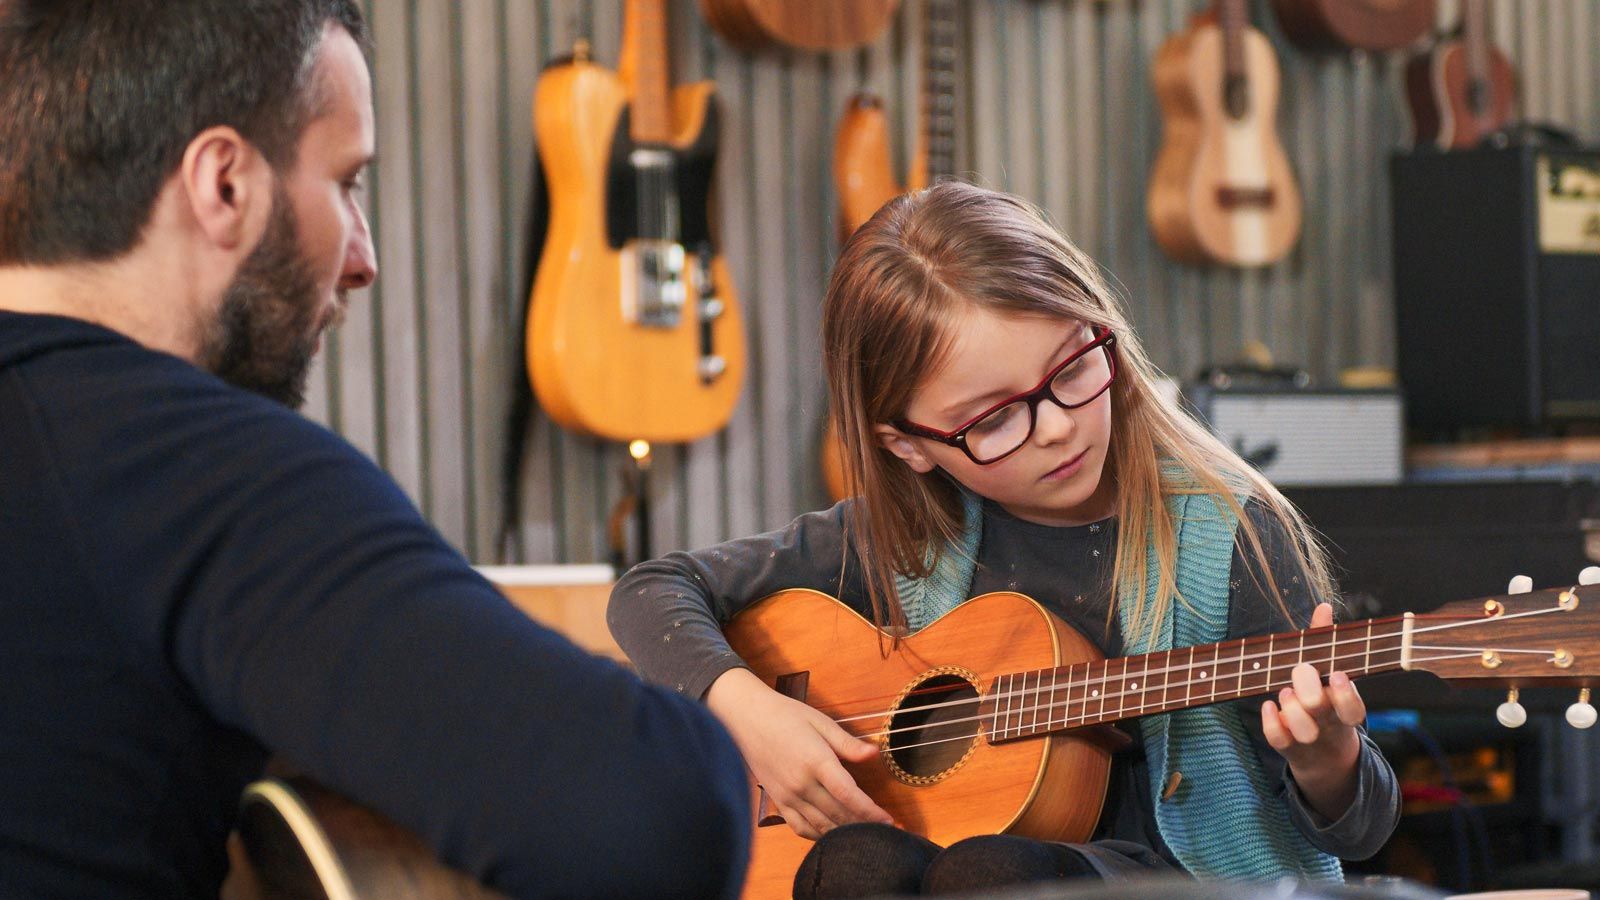 Young girl playing guitar with instructor